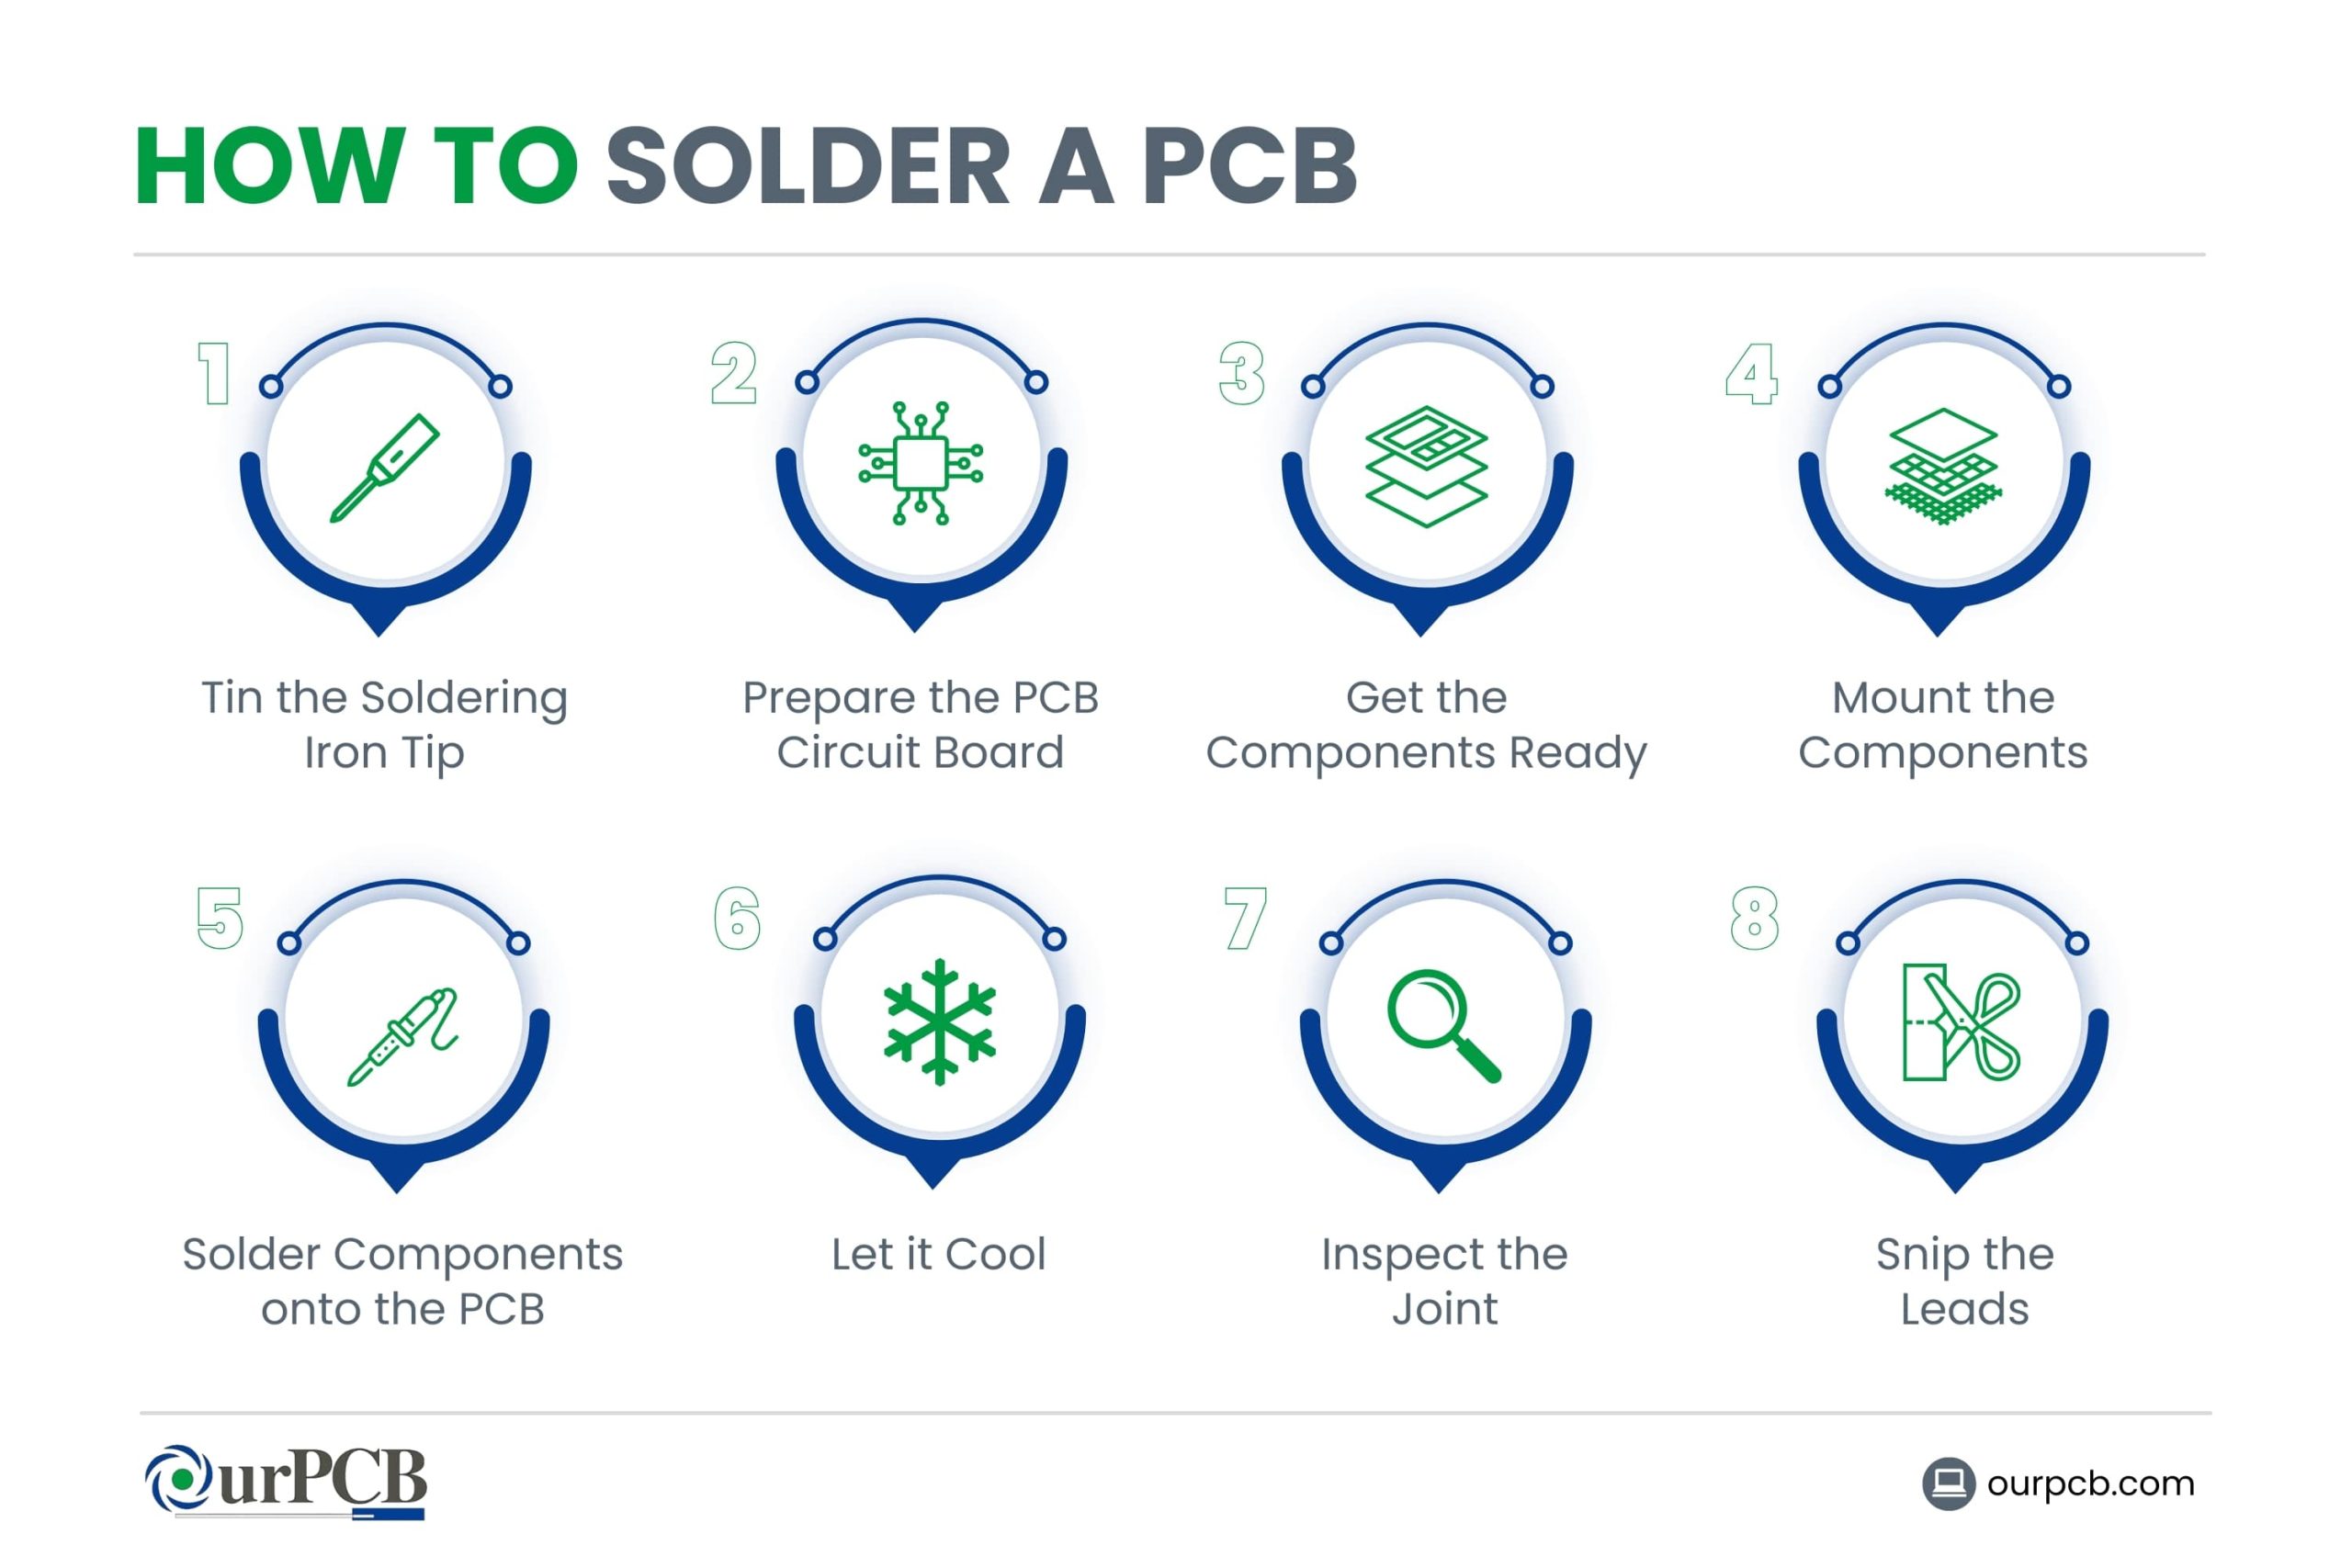 How to Solder a PCB